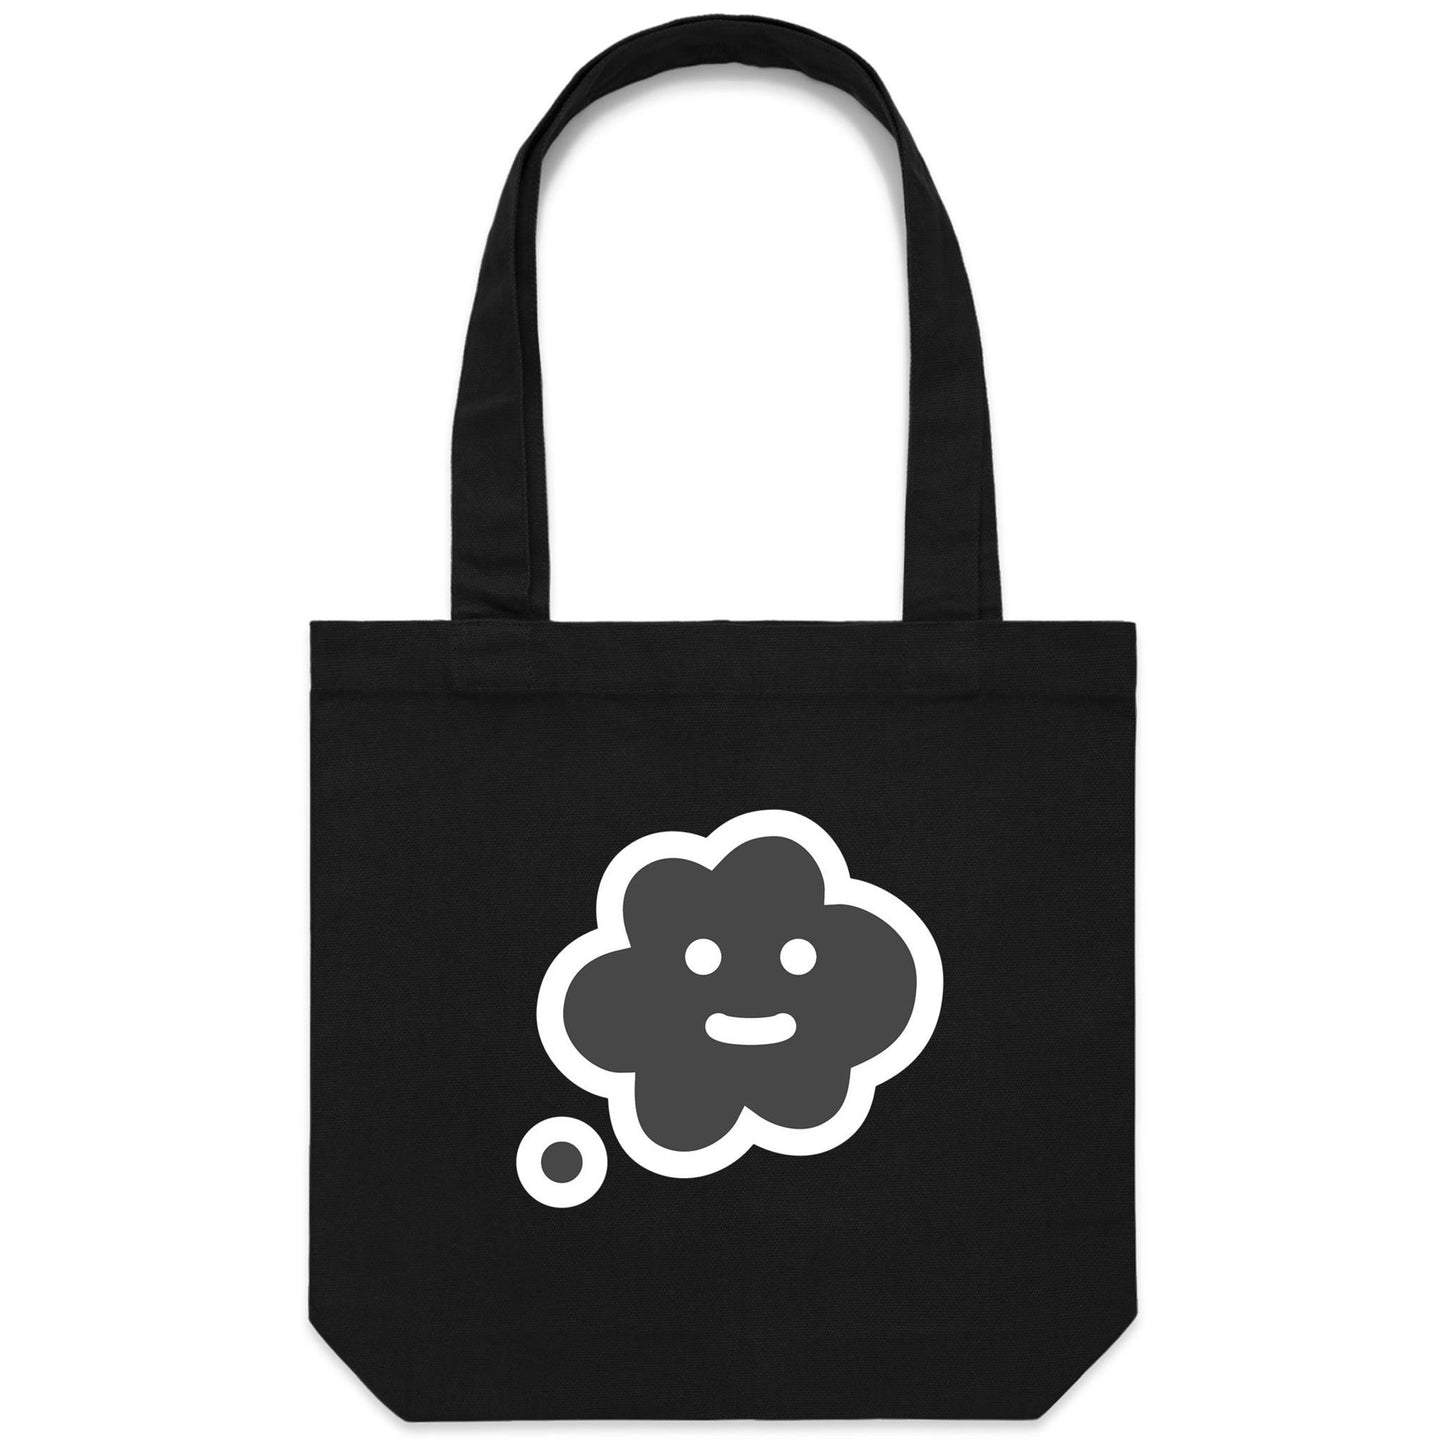 Thought Bubble Face Canvas Totes